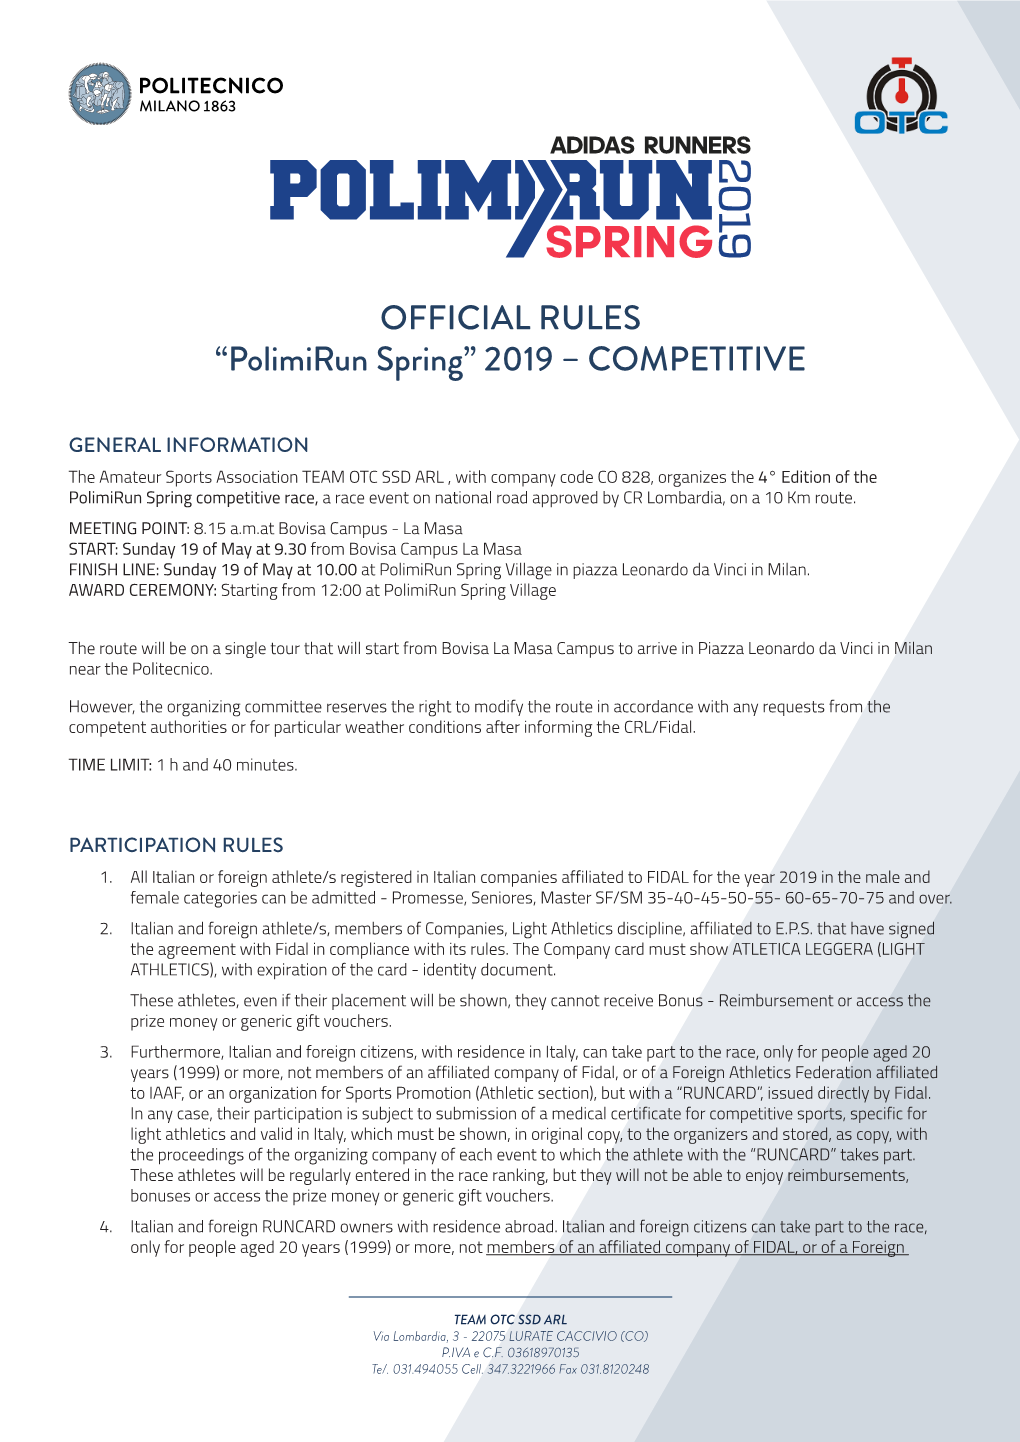 OFFICIAL RULES “Polimirun Spring” 2019 – COMPETITIVE